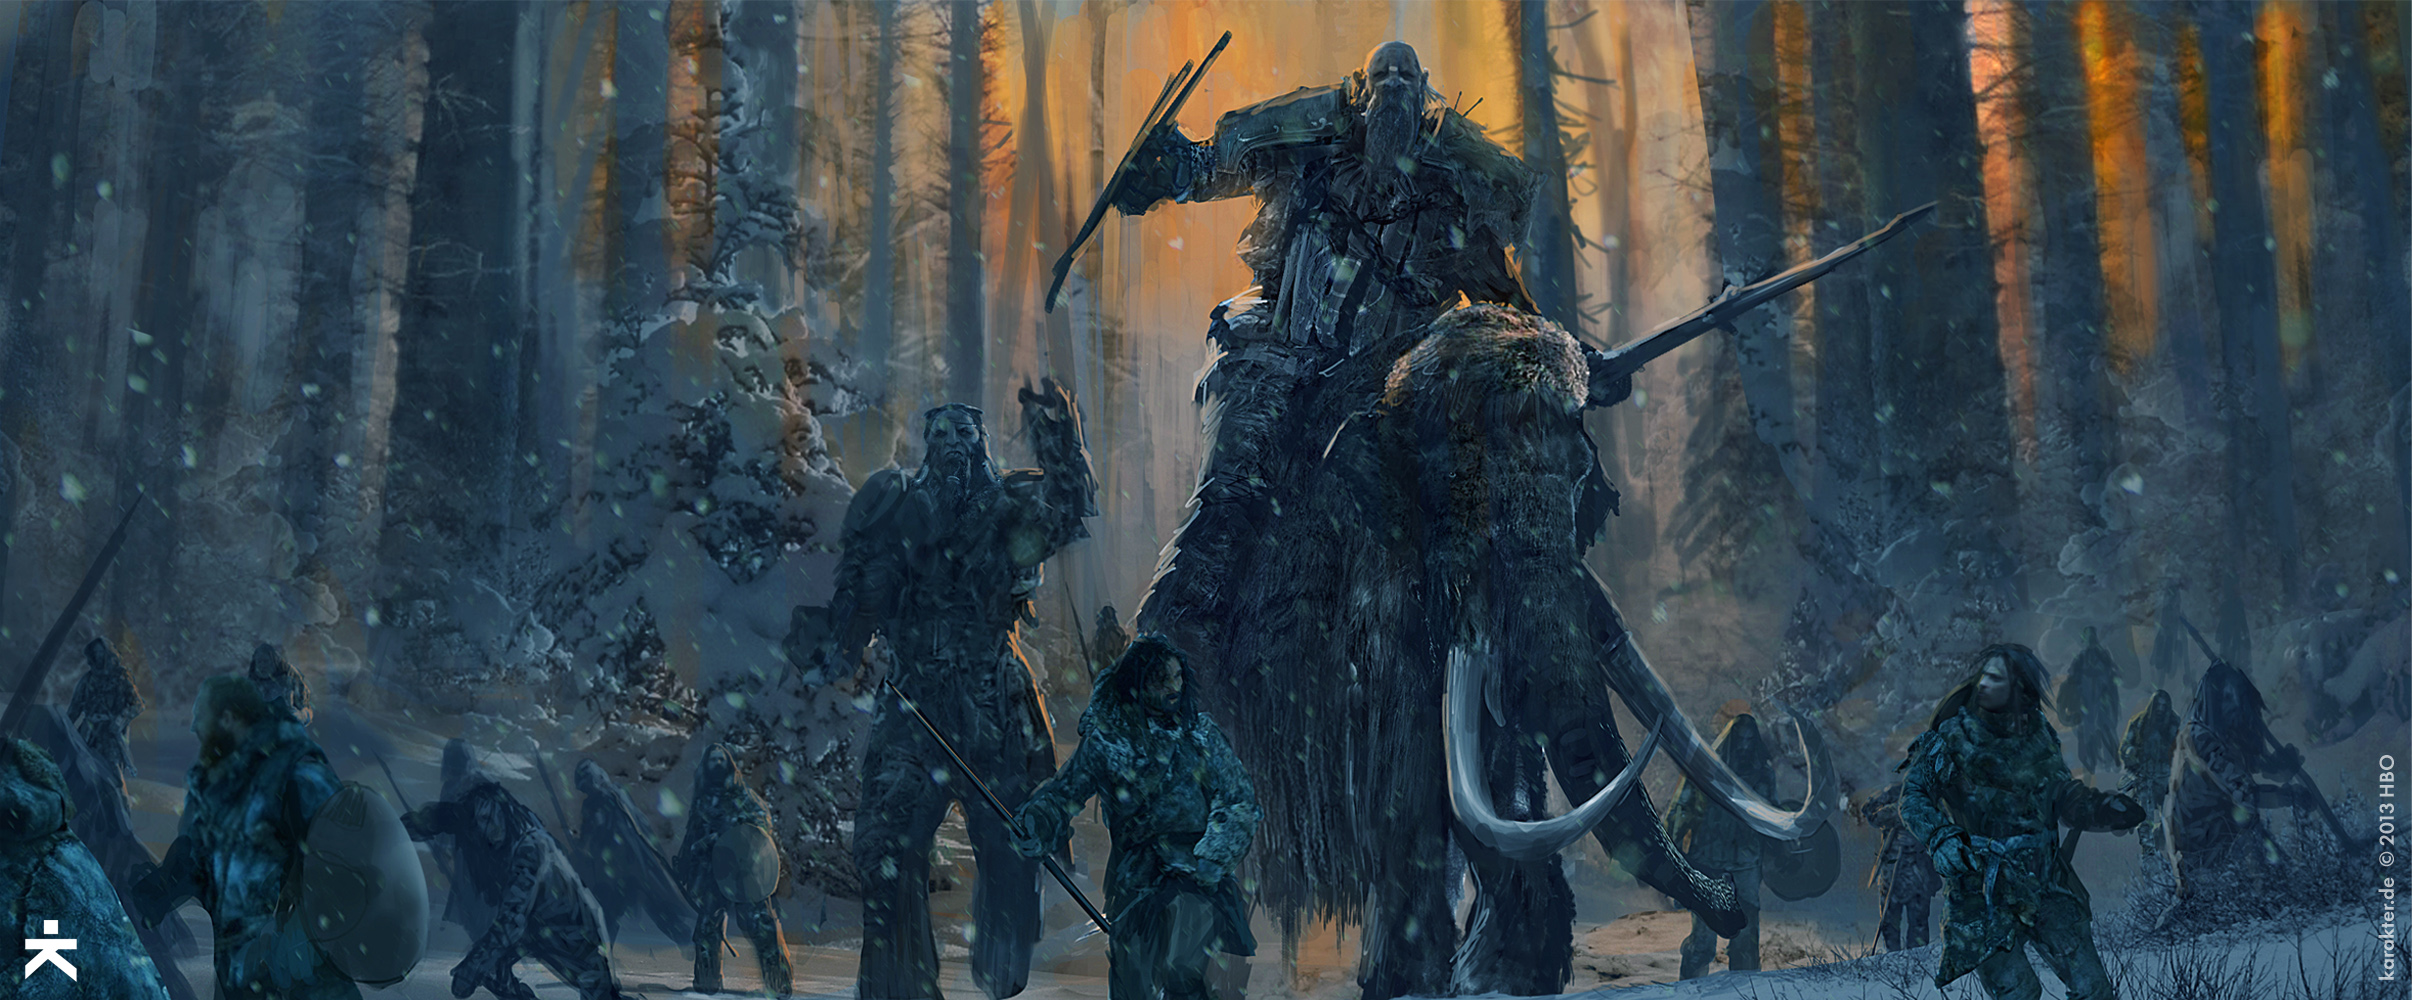 The Concept Art Behind Game Of Thrones: Season 4